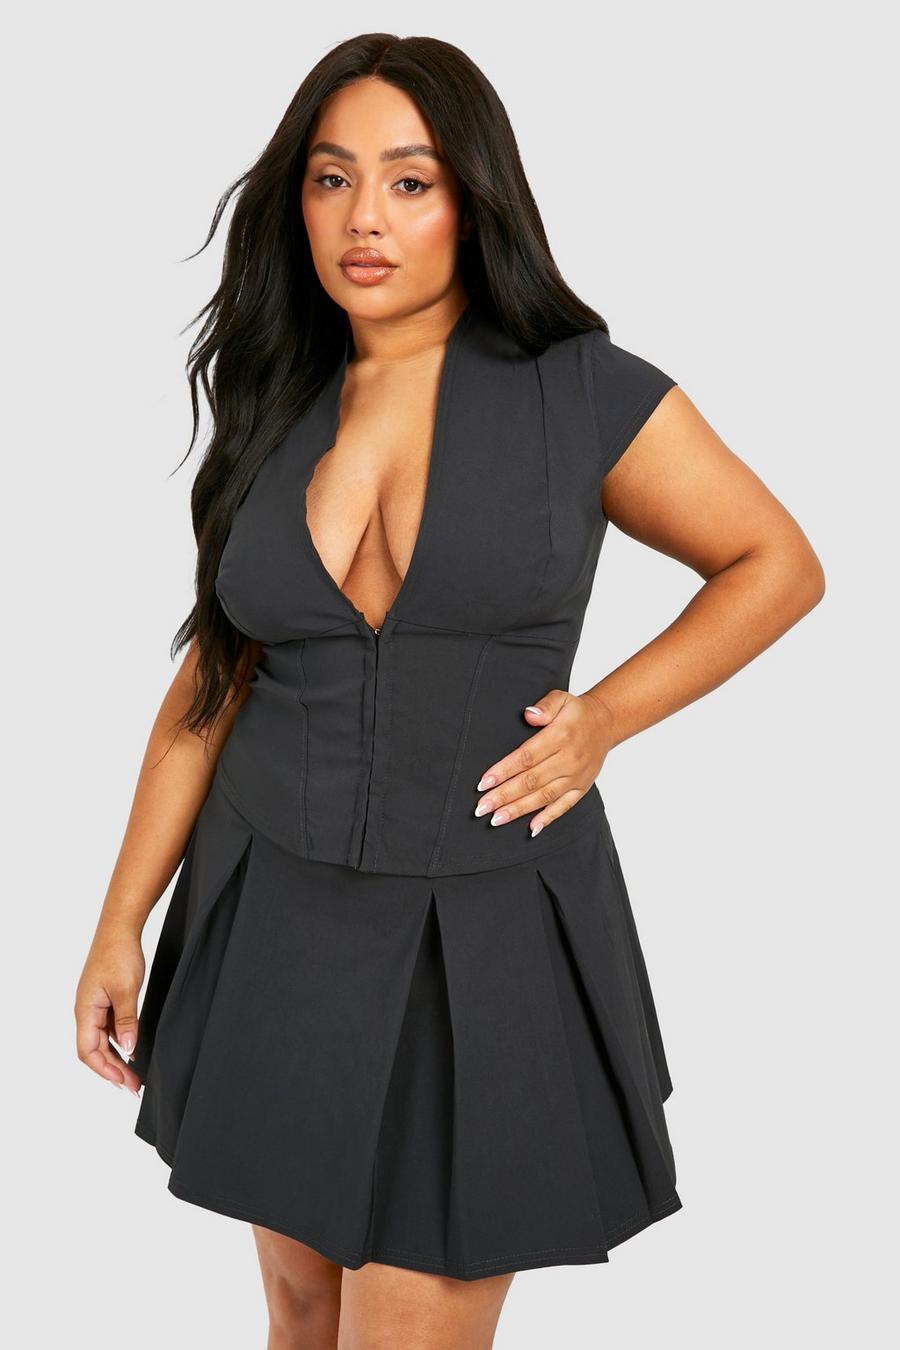 An Unexpected Pairing  Plus size winter outfits, Plus size